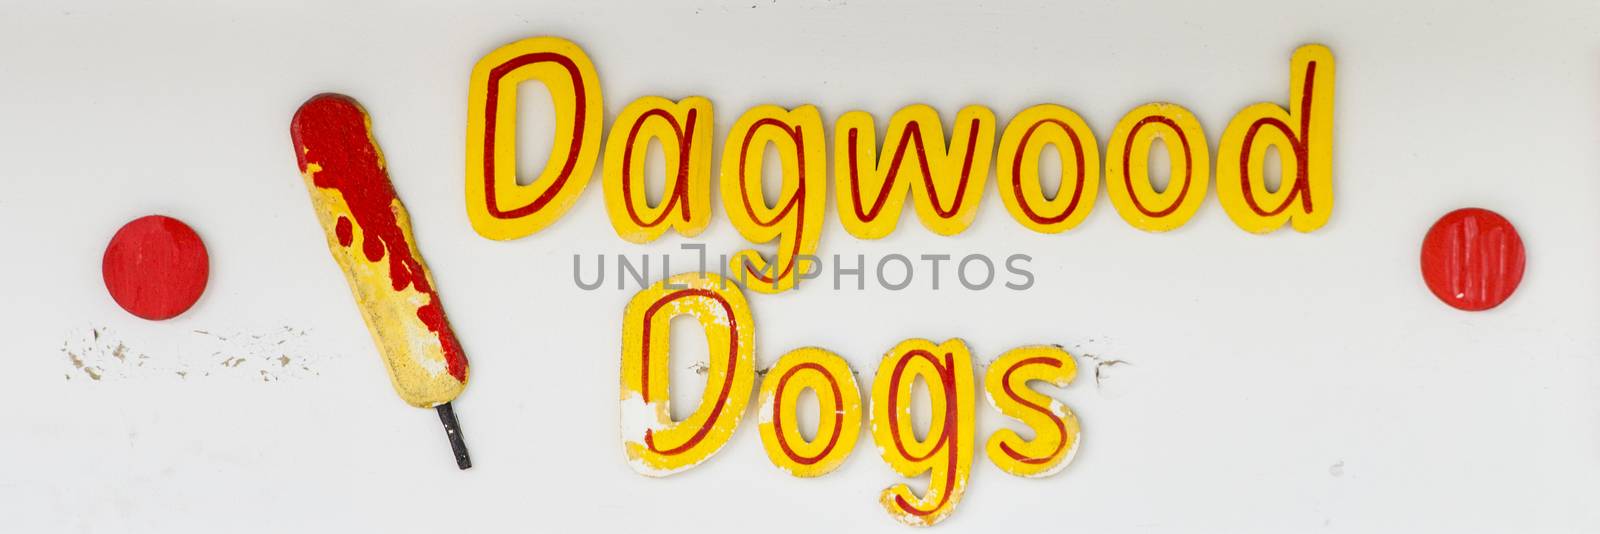 Dagwood Dogs Sign by thisboy